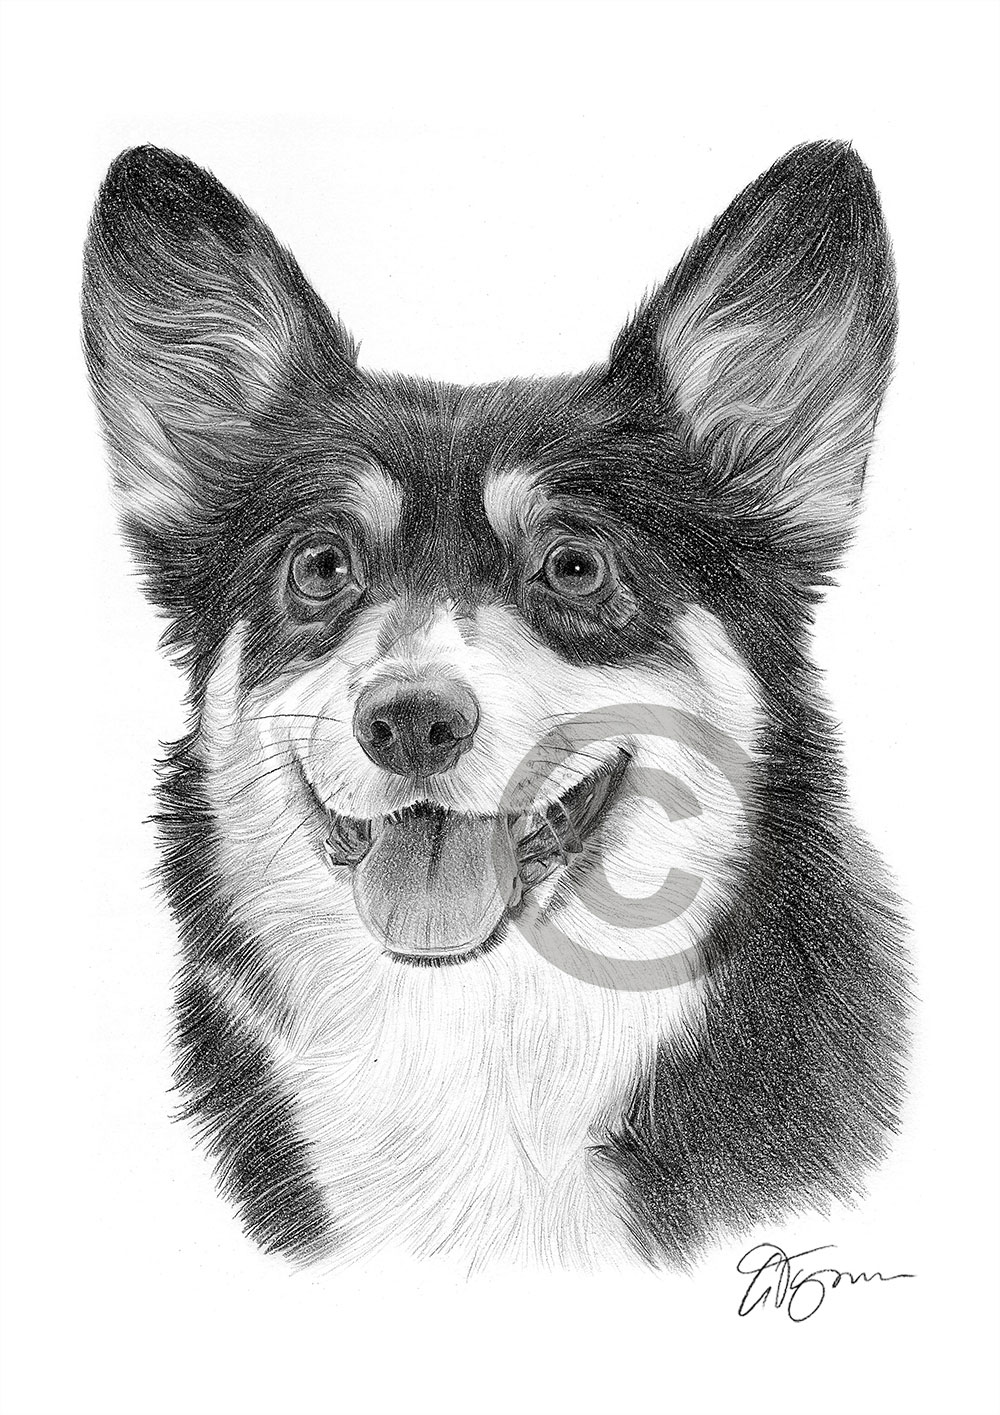 Pencil drawing of a young Pembrokeshire Corgi by artist Gary Tymon